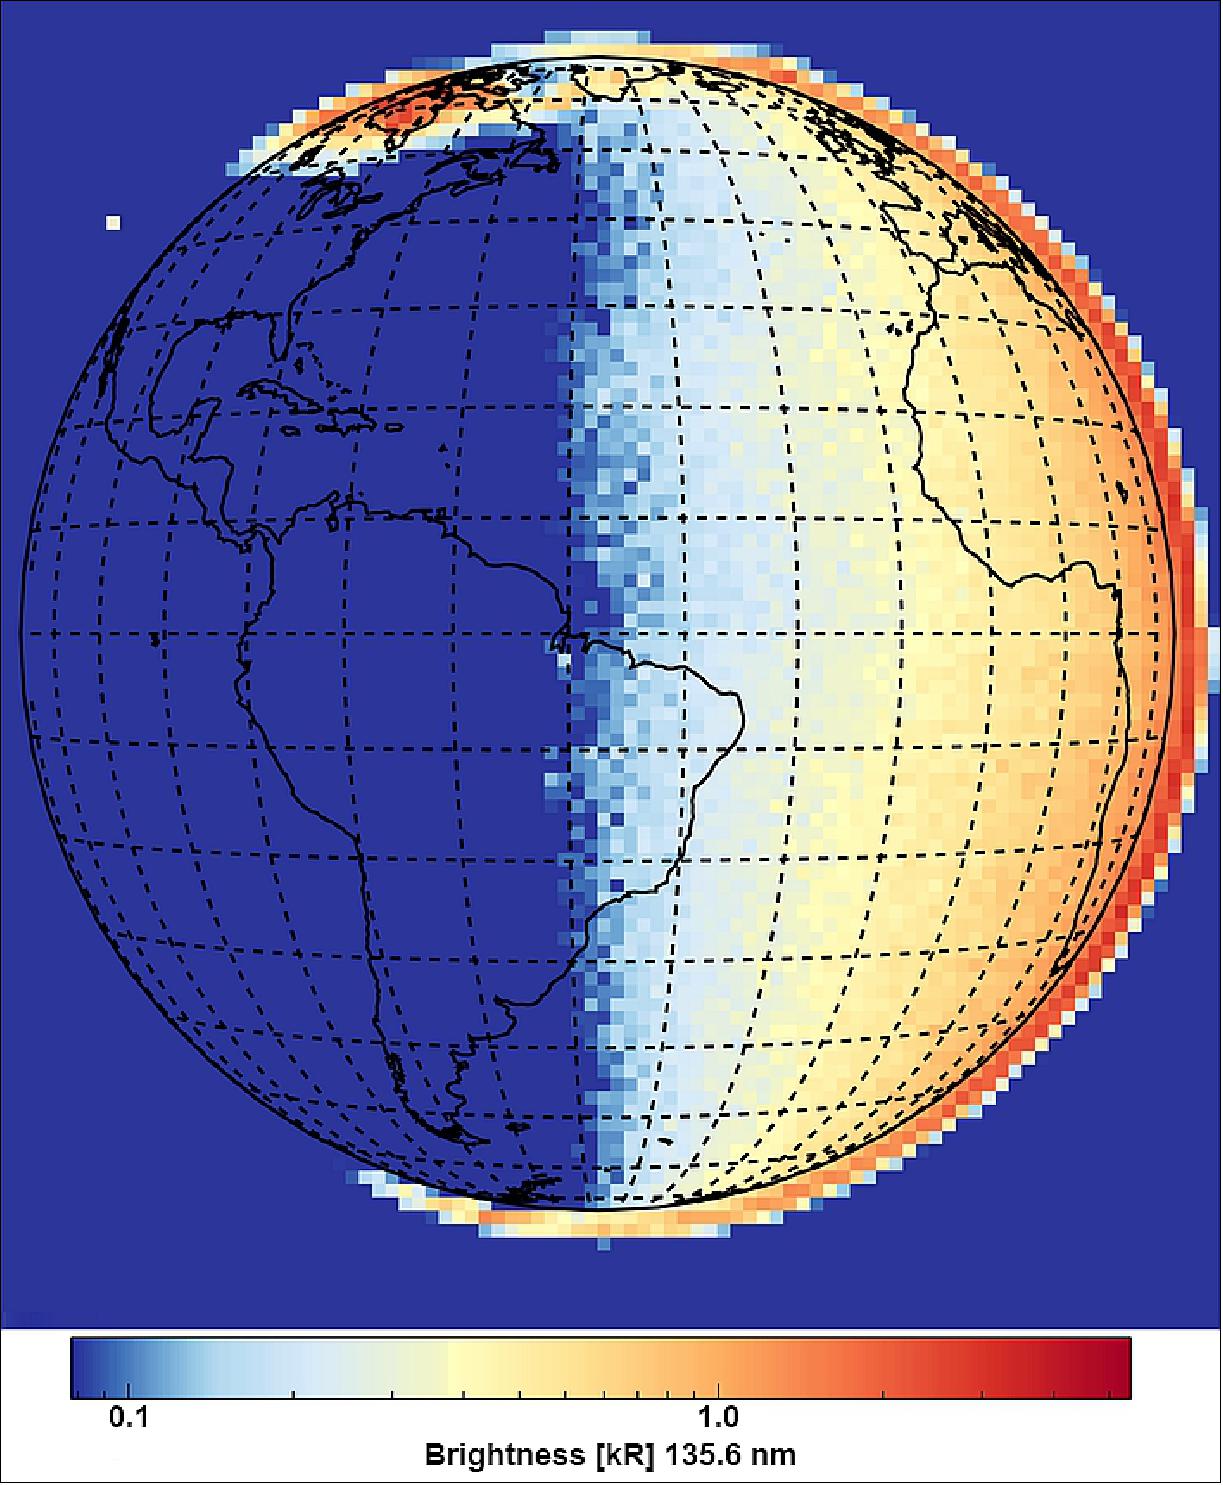 Figure 30: Shown here is the “first light” image of ultraviolet atomic oxygen emission (135.6 nm wavelength) from the Earth’s upper atmosphere captured by NASA’s GOLD instrument. It was taken at approximately 6 a.m. local time, near sunrise in eastern South America. The colors correspond to emission brightness, with the strongest shown in red and the weakest in blue. This emission is produced at altitudes around 160 km (note how it extends above the Earth’s surface on the horizon), when the Earth’s upper atmosphere absorbs high energy photons and particles. The aurora, at the top and bottom of the image, and daytime airglow, on the right hand side, are also visible. An ultraviolet star, 66 Ophiuchi (HD 164284), is visible above the western horizon of the Earth. Outlines of the continents and a latitude-longitude grid have been added for reference (image credit: LASP/GOLD science team)